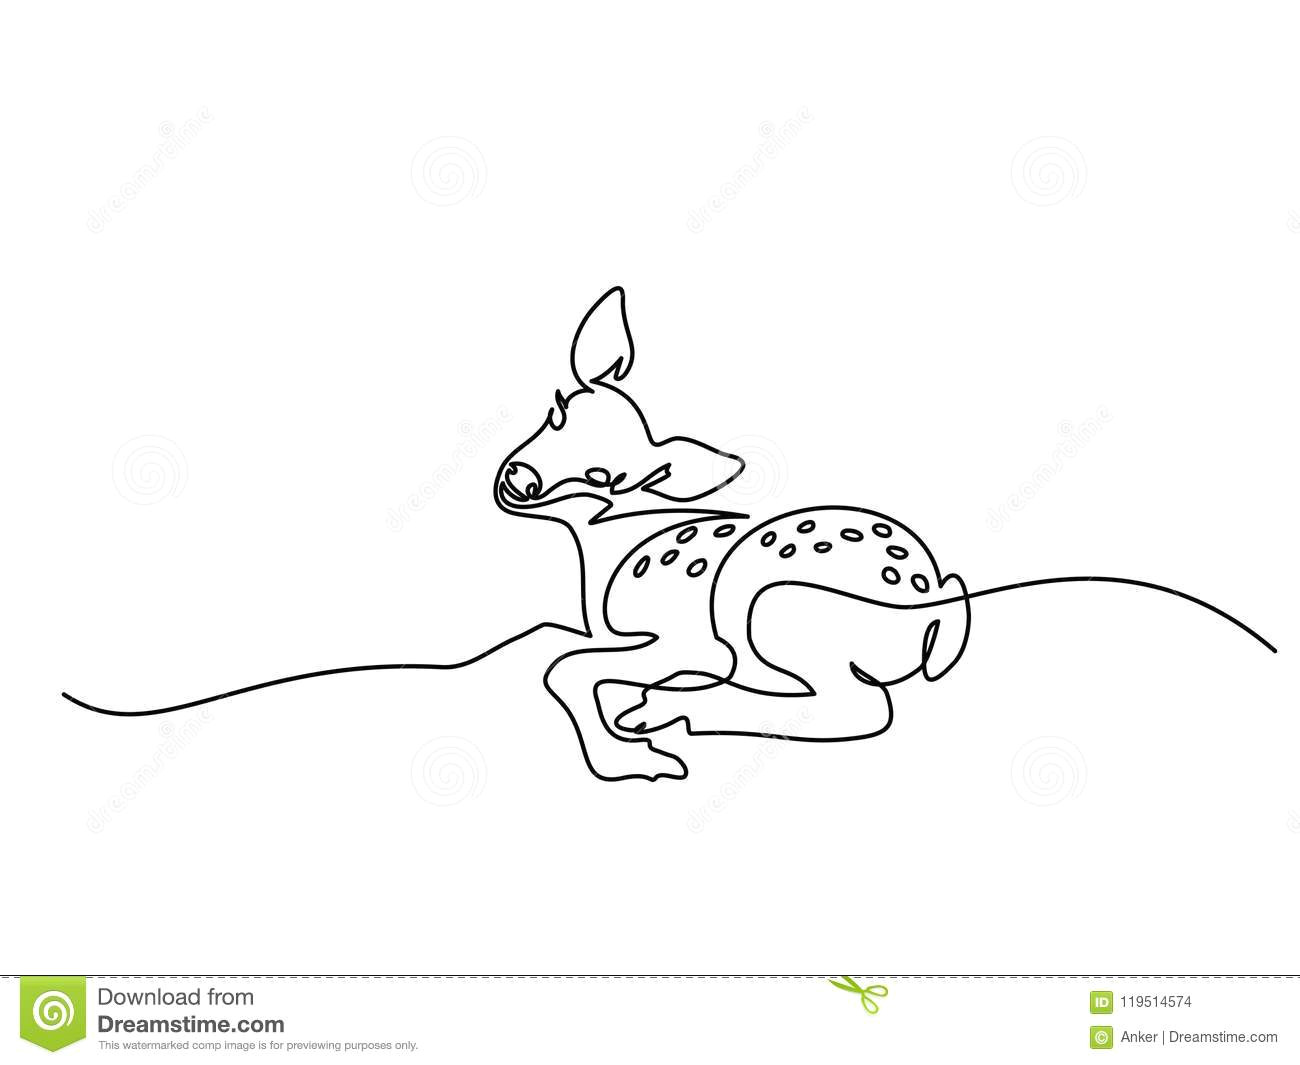 Continuous Line Drawing Of A Dog Funny Deer Cub Baby Stock Vector Illustration Of Handdrawn 119514574